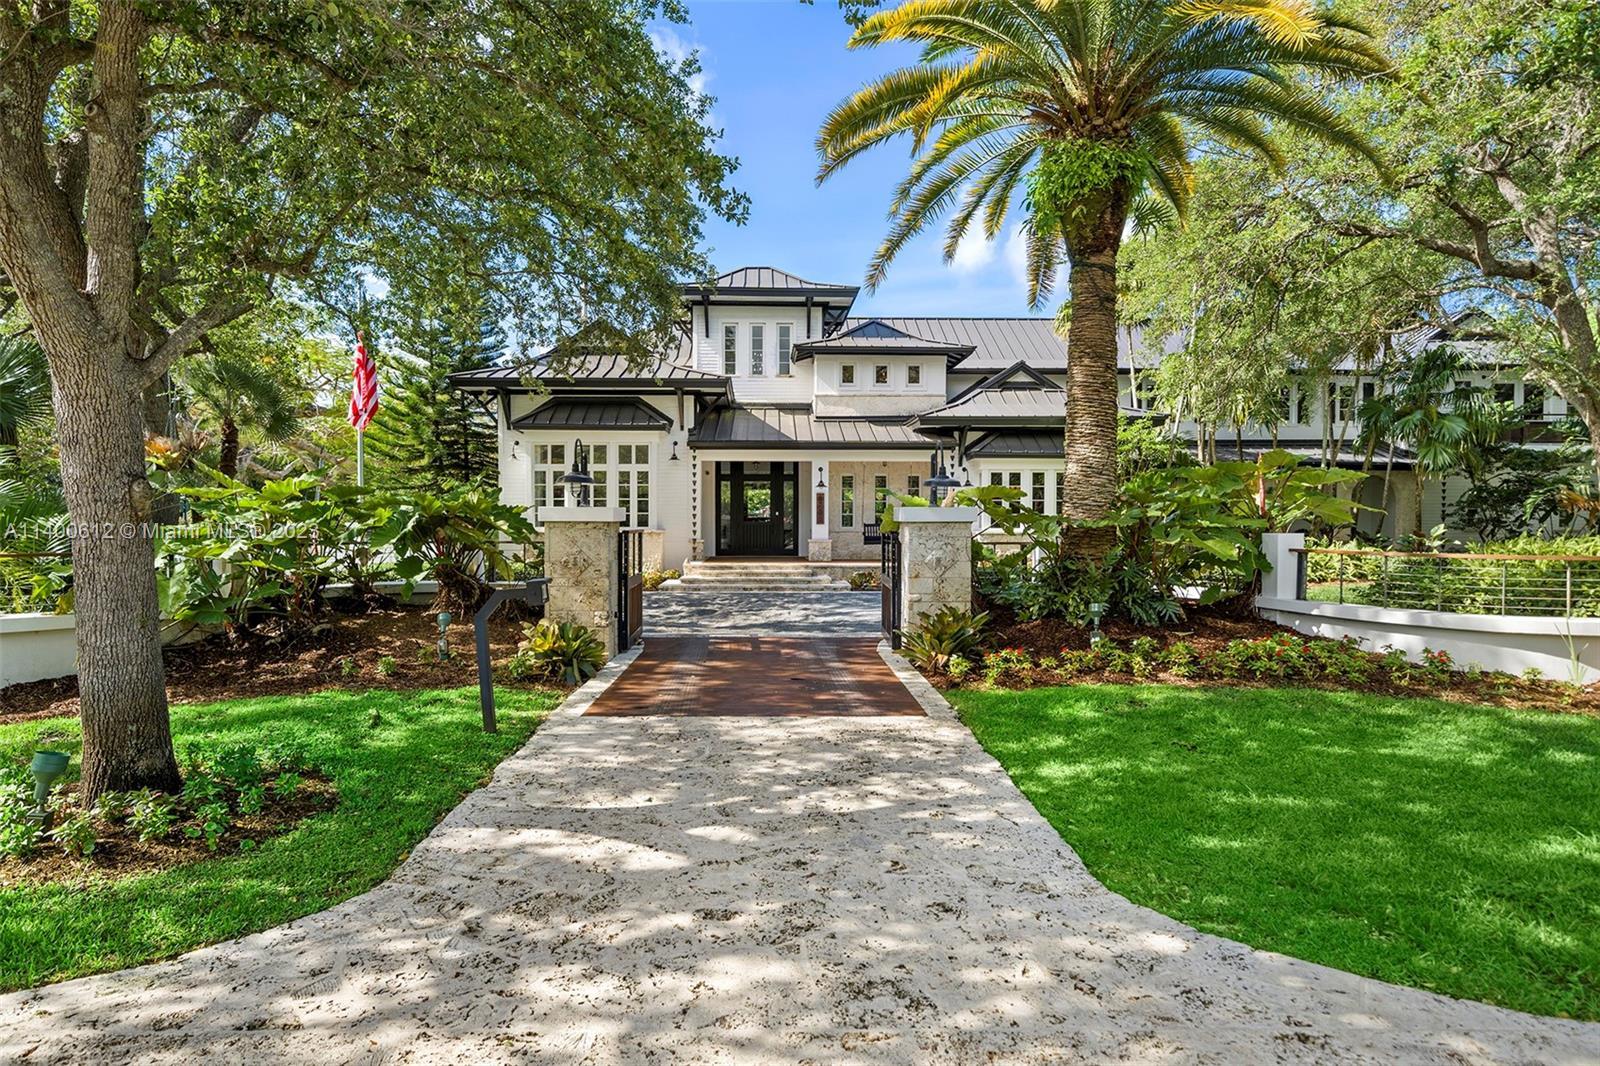 Welcome to Pinecrest's most exquisite custom-built masterpiece! This stunning estate is situated on 